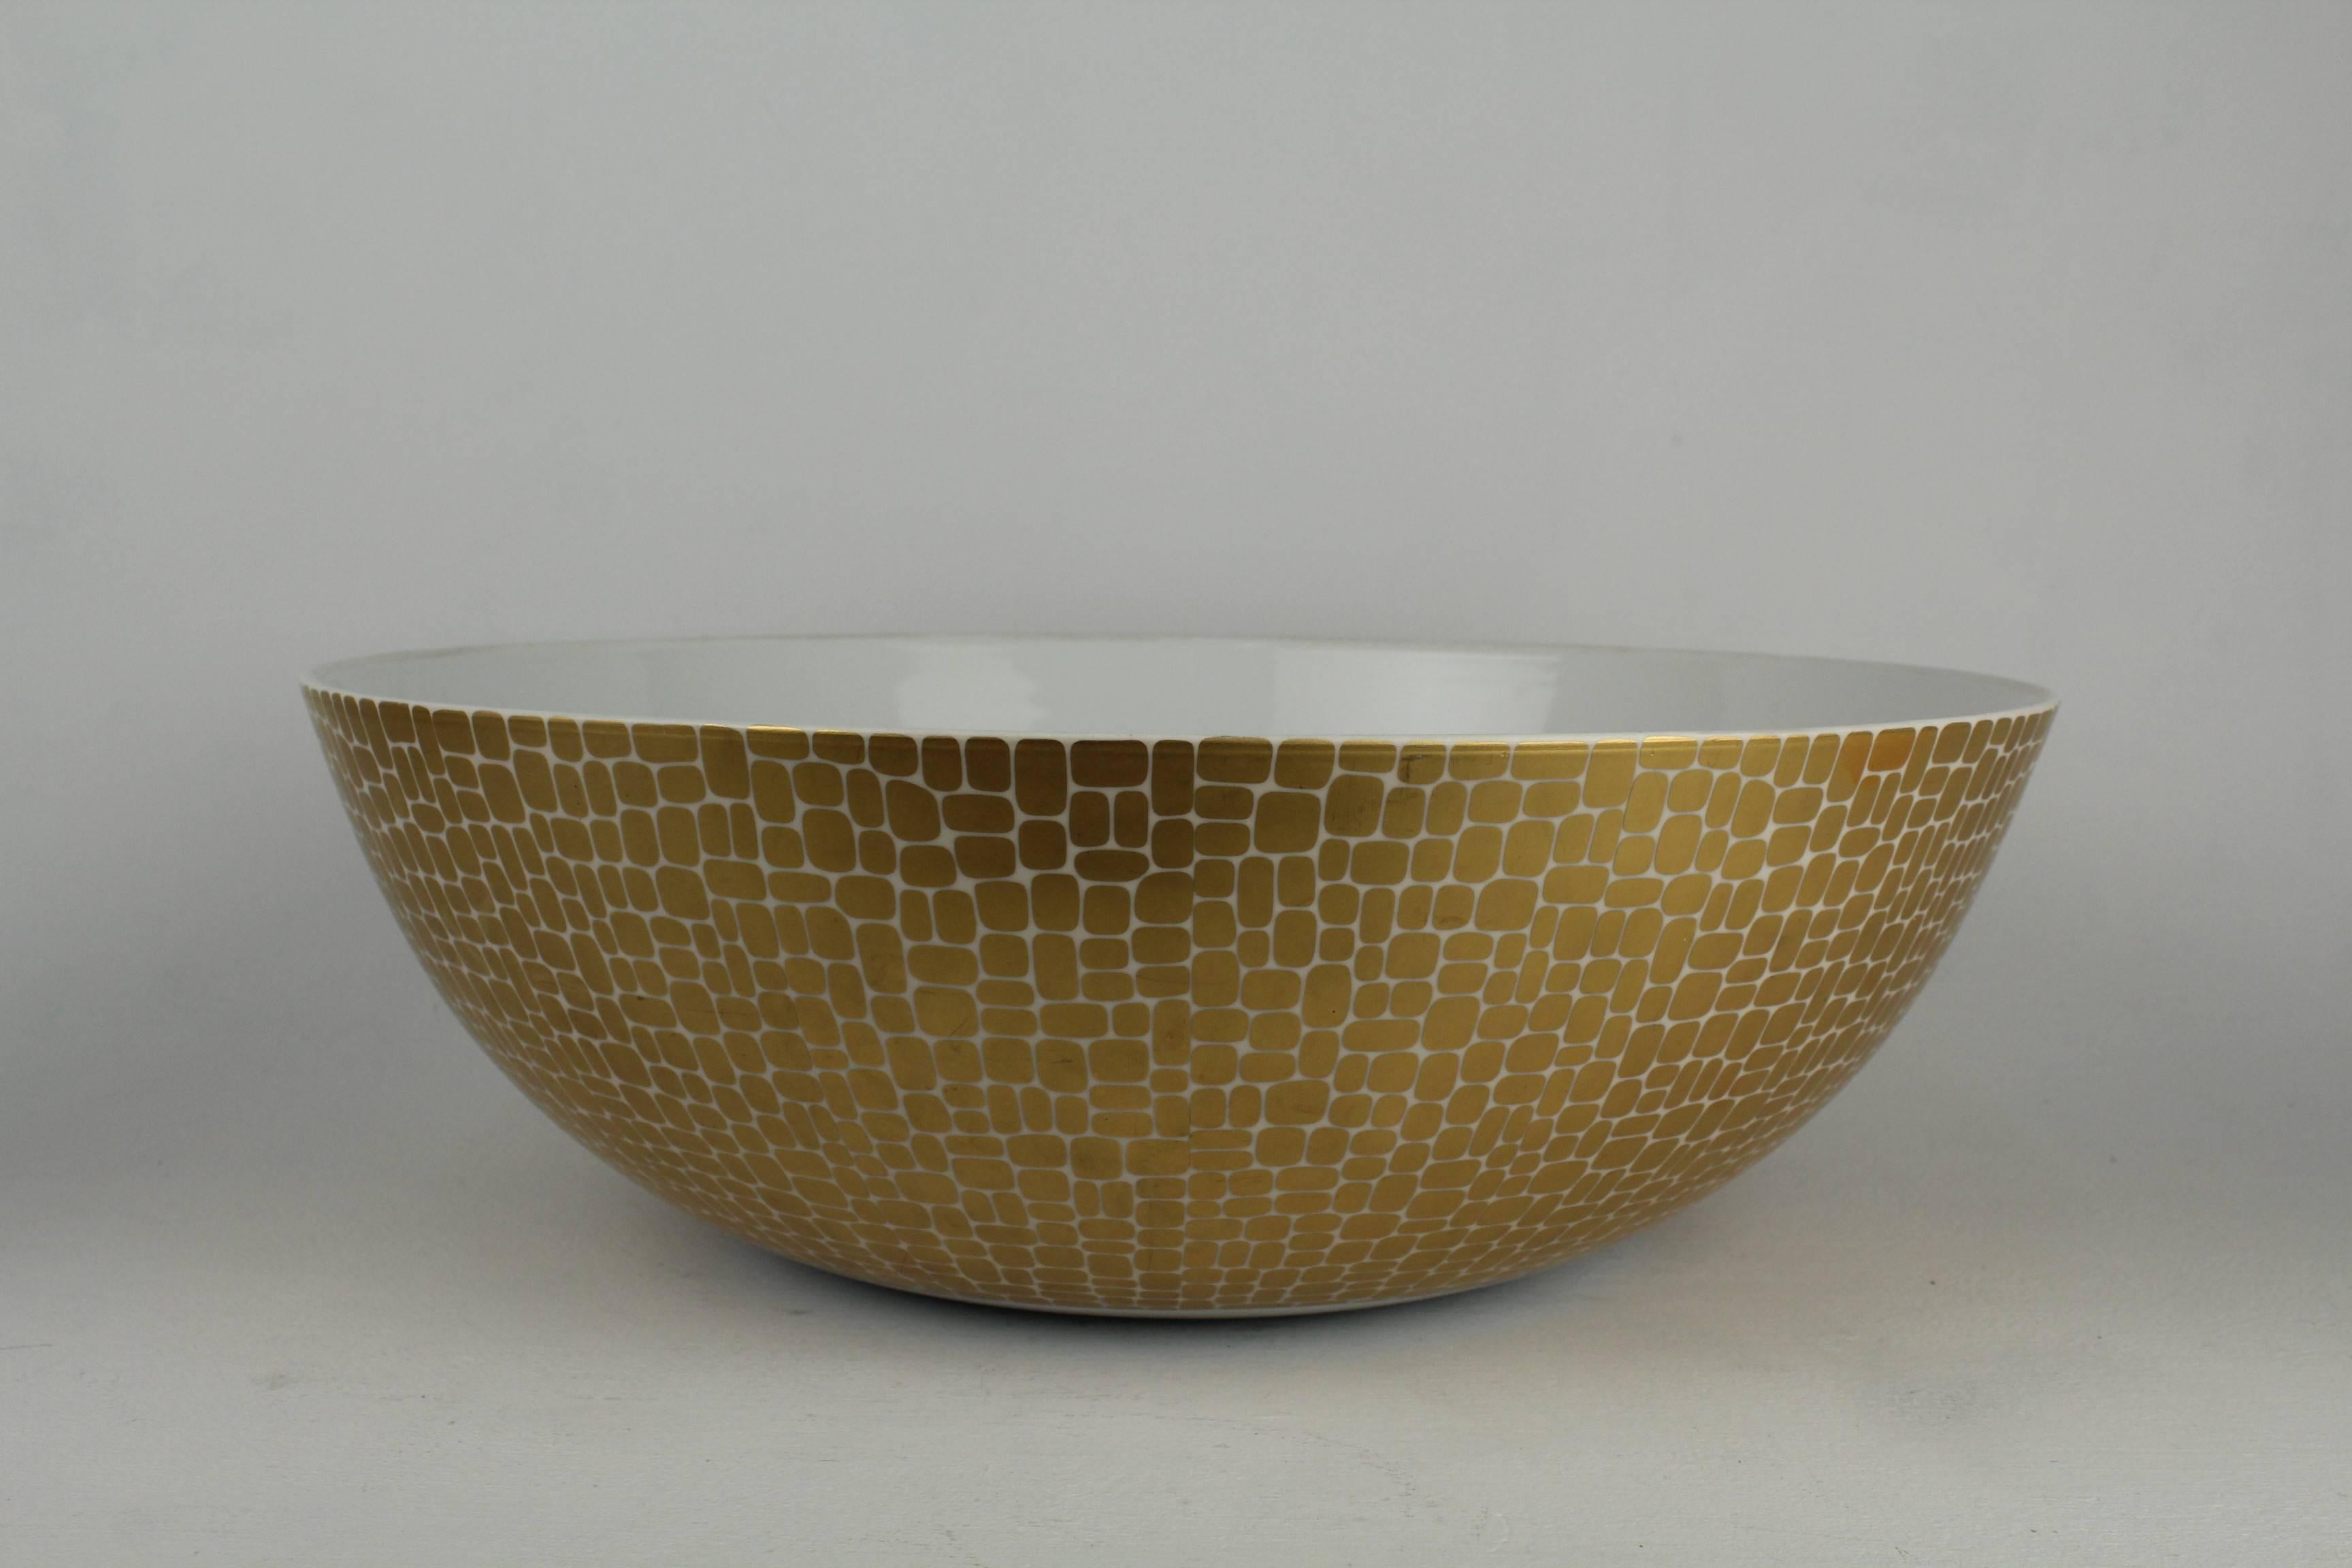 Gilt Large Metropol Punch Porcelain Bowl by Emilio Pucci for Rosenthal Studio Linie